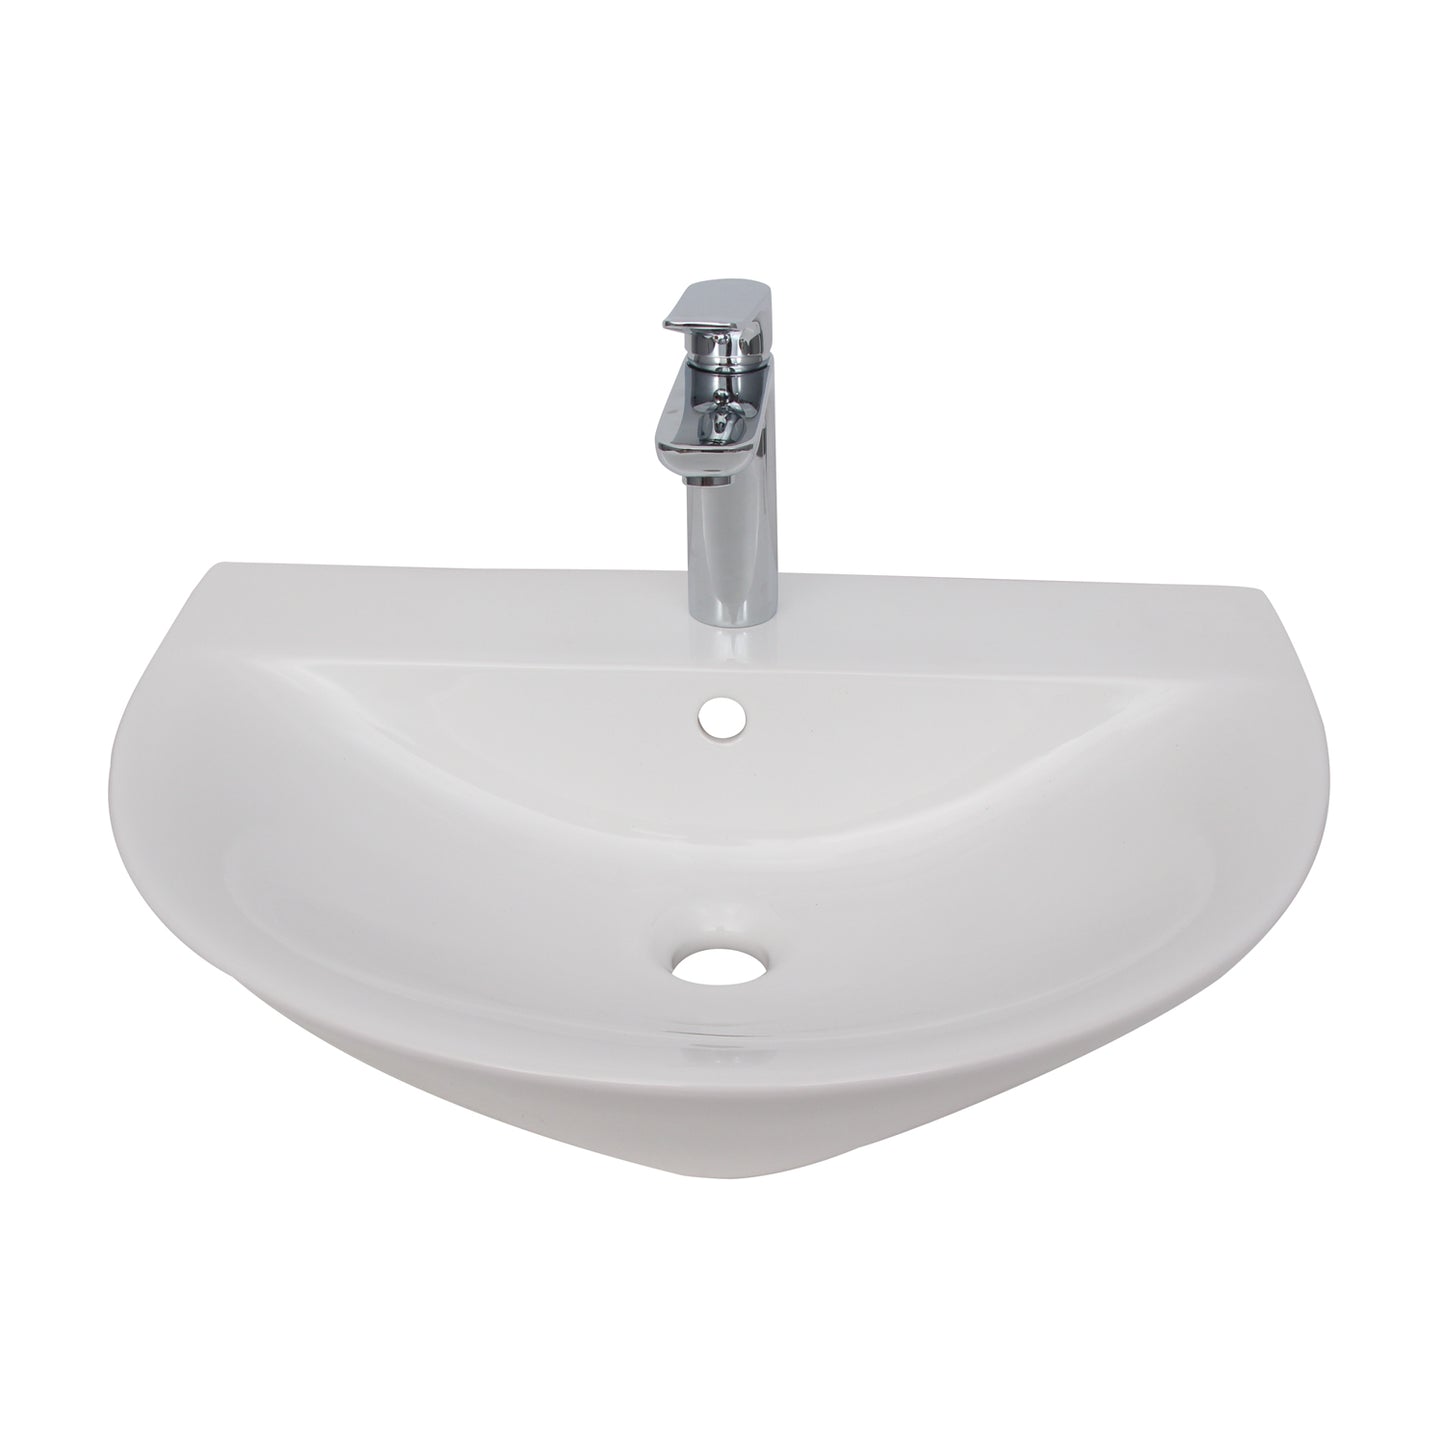 Morning 500 Wall Hung Bathroom Sink with 1 Faucet Hole White